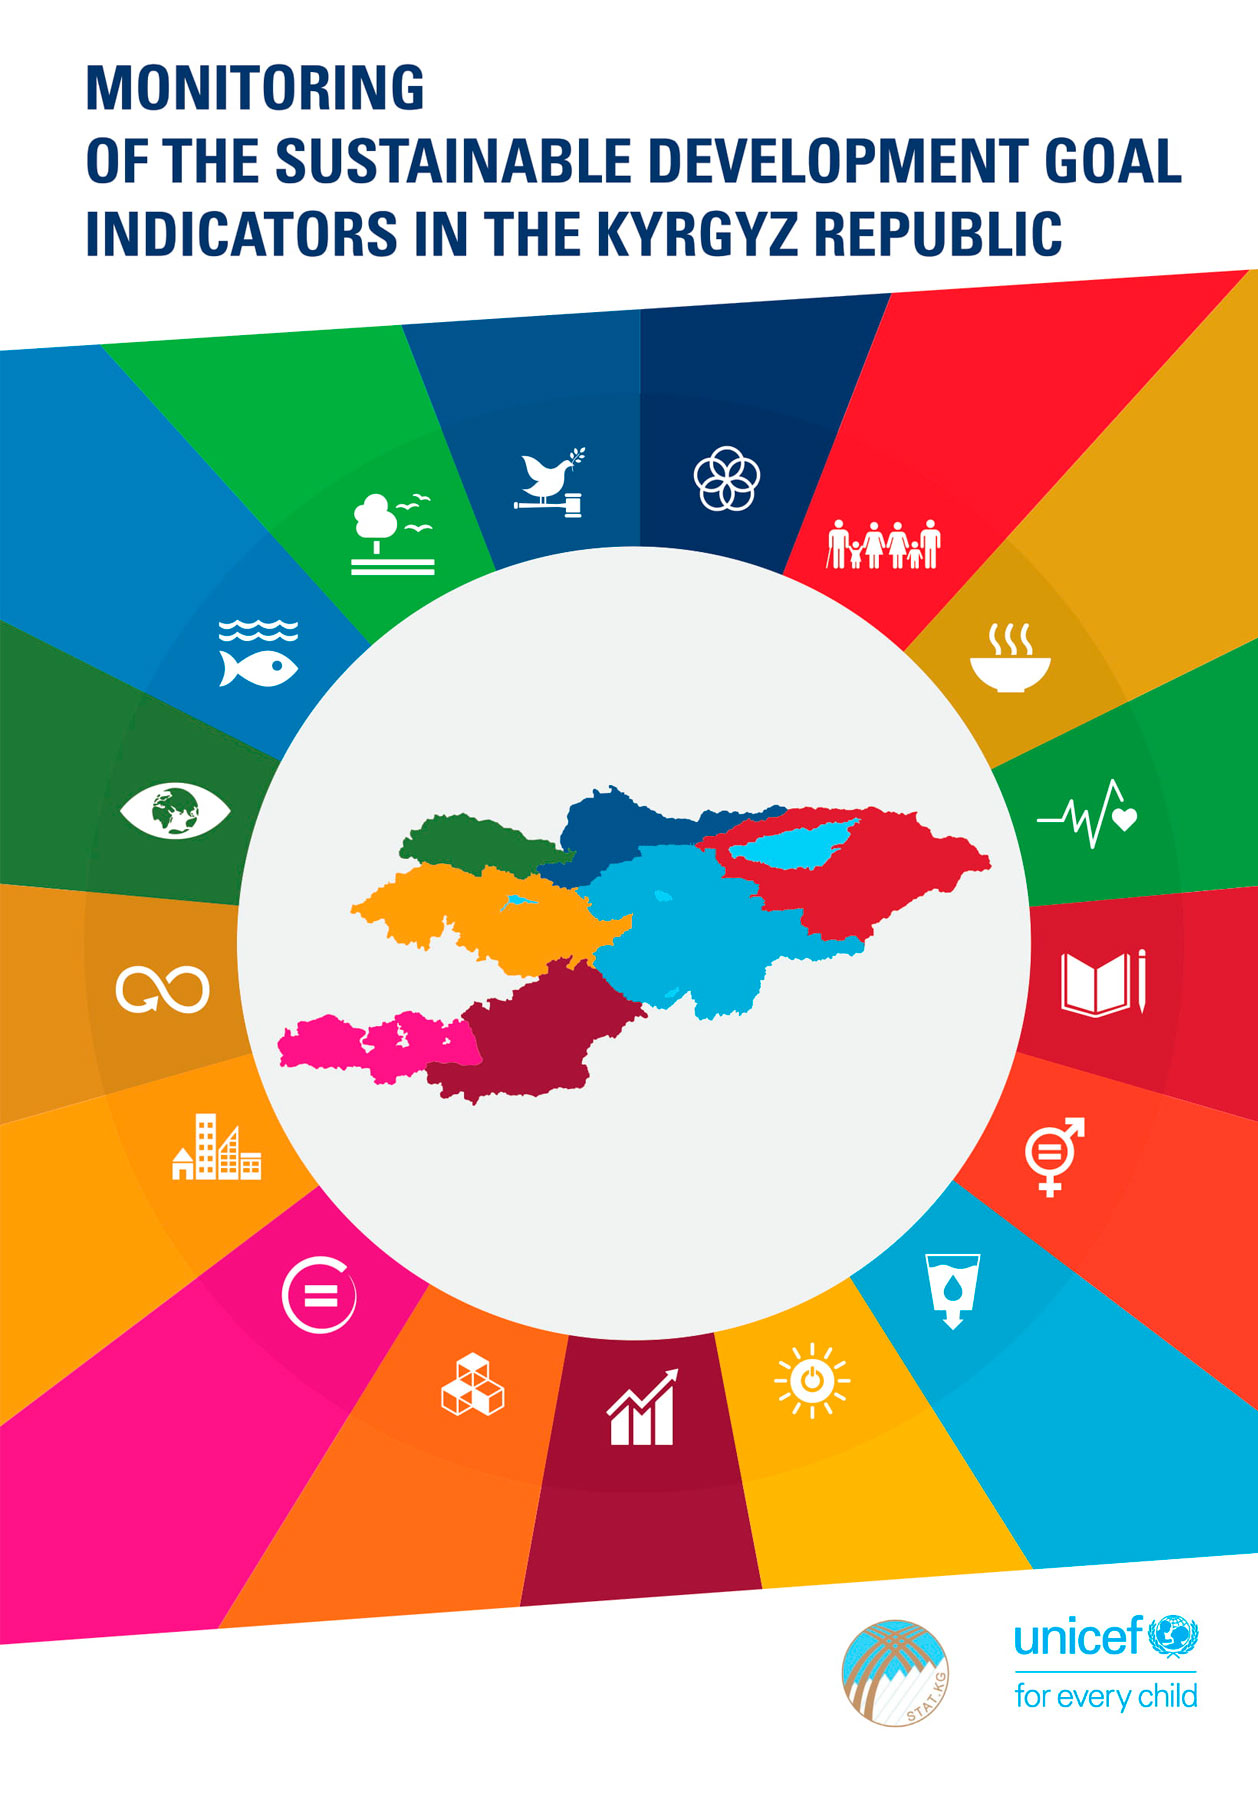 The Statistical Compendium “Monitoring of the Sustainable Development Goal Indicators in the Kyrgyz Republic”